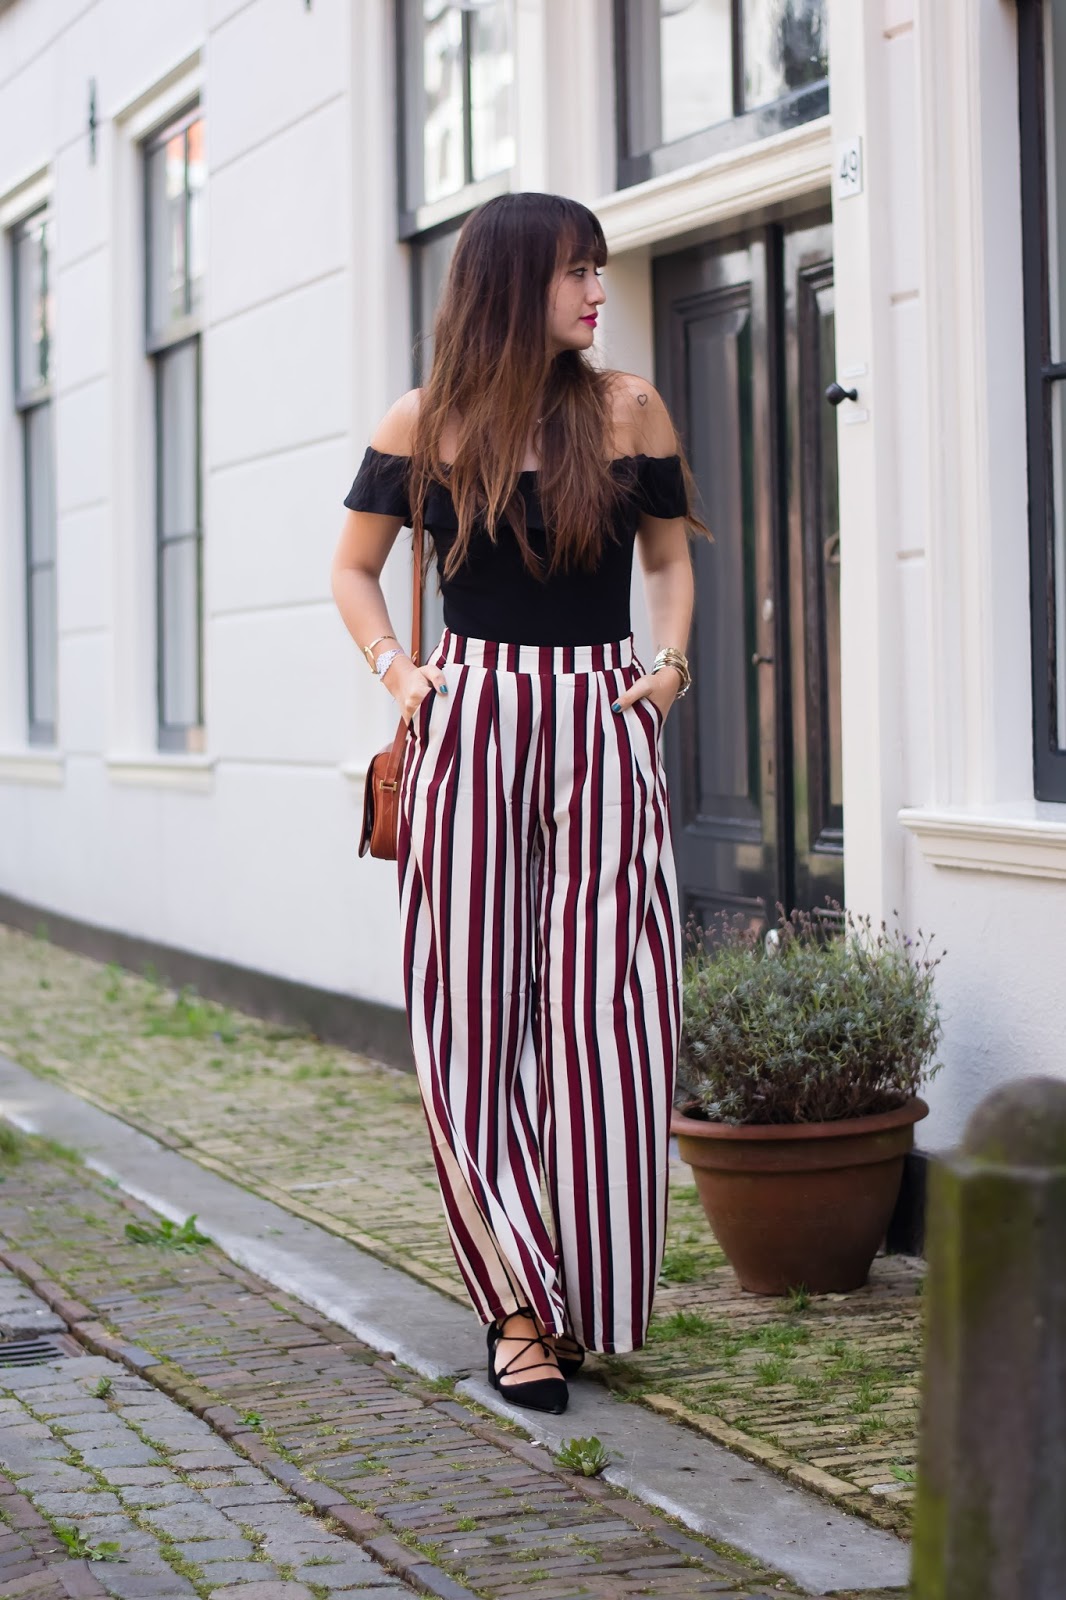 meetmeinparee, paris, blogger, fashion, look, style, chic parisian style, outfits, inspiration